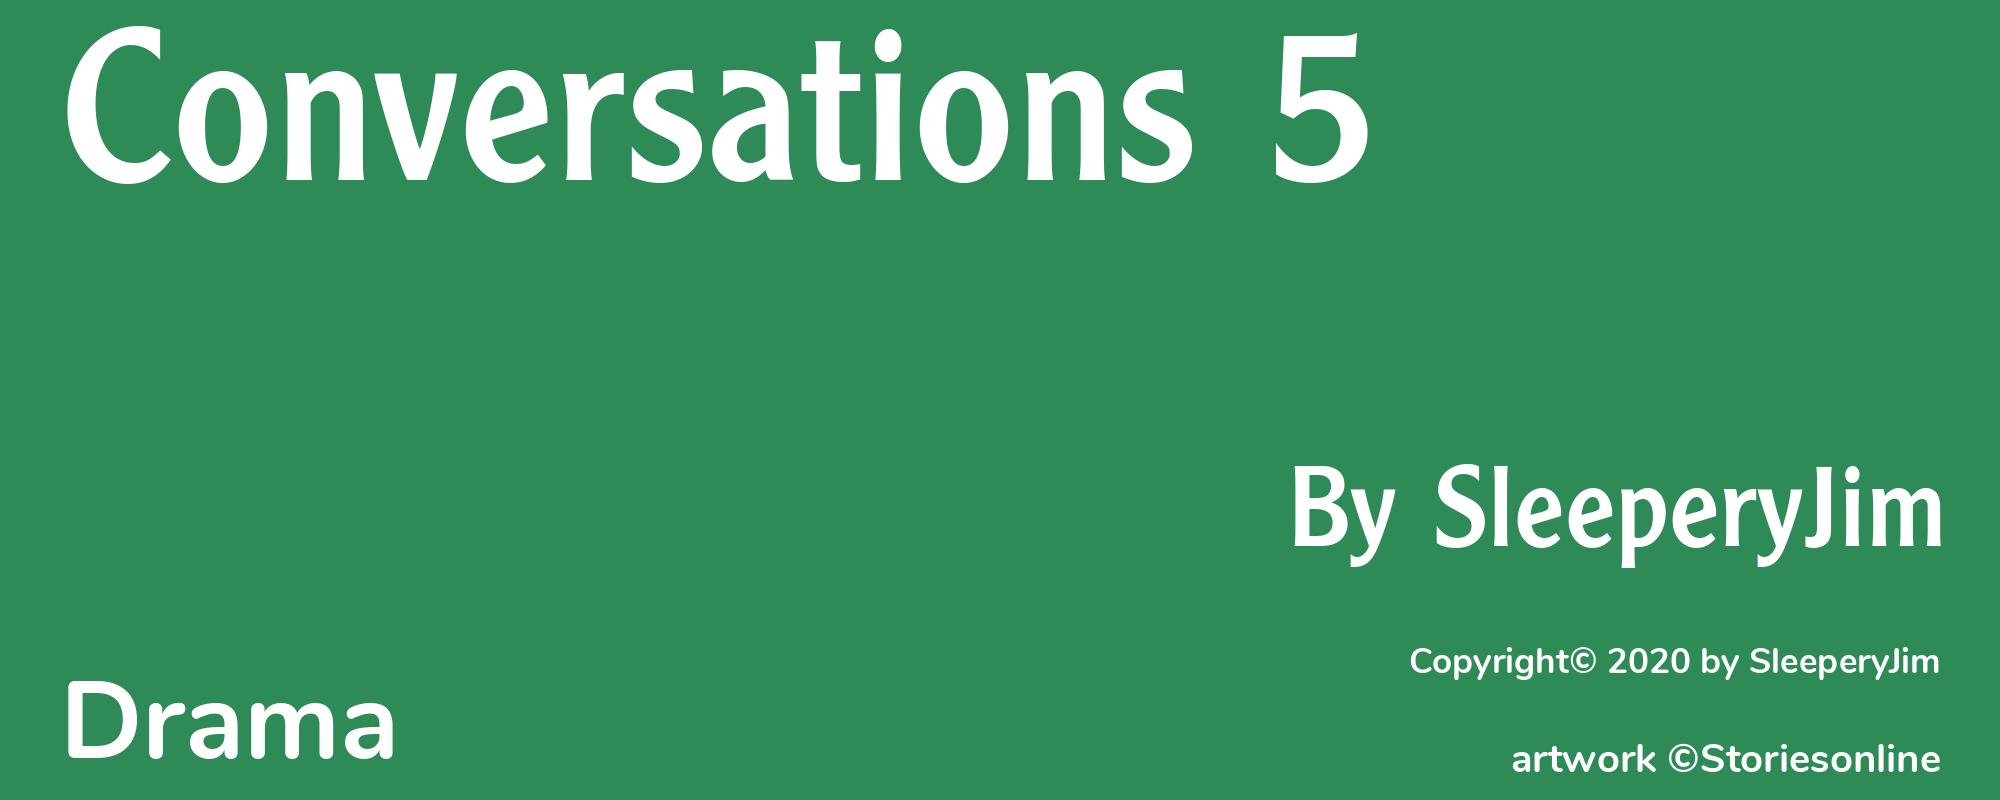 Conversations 5 - Cover